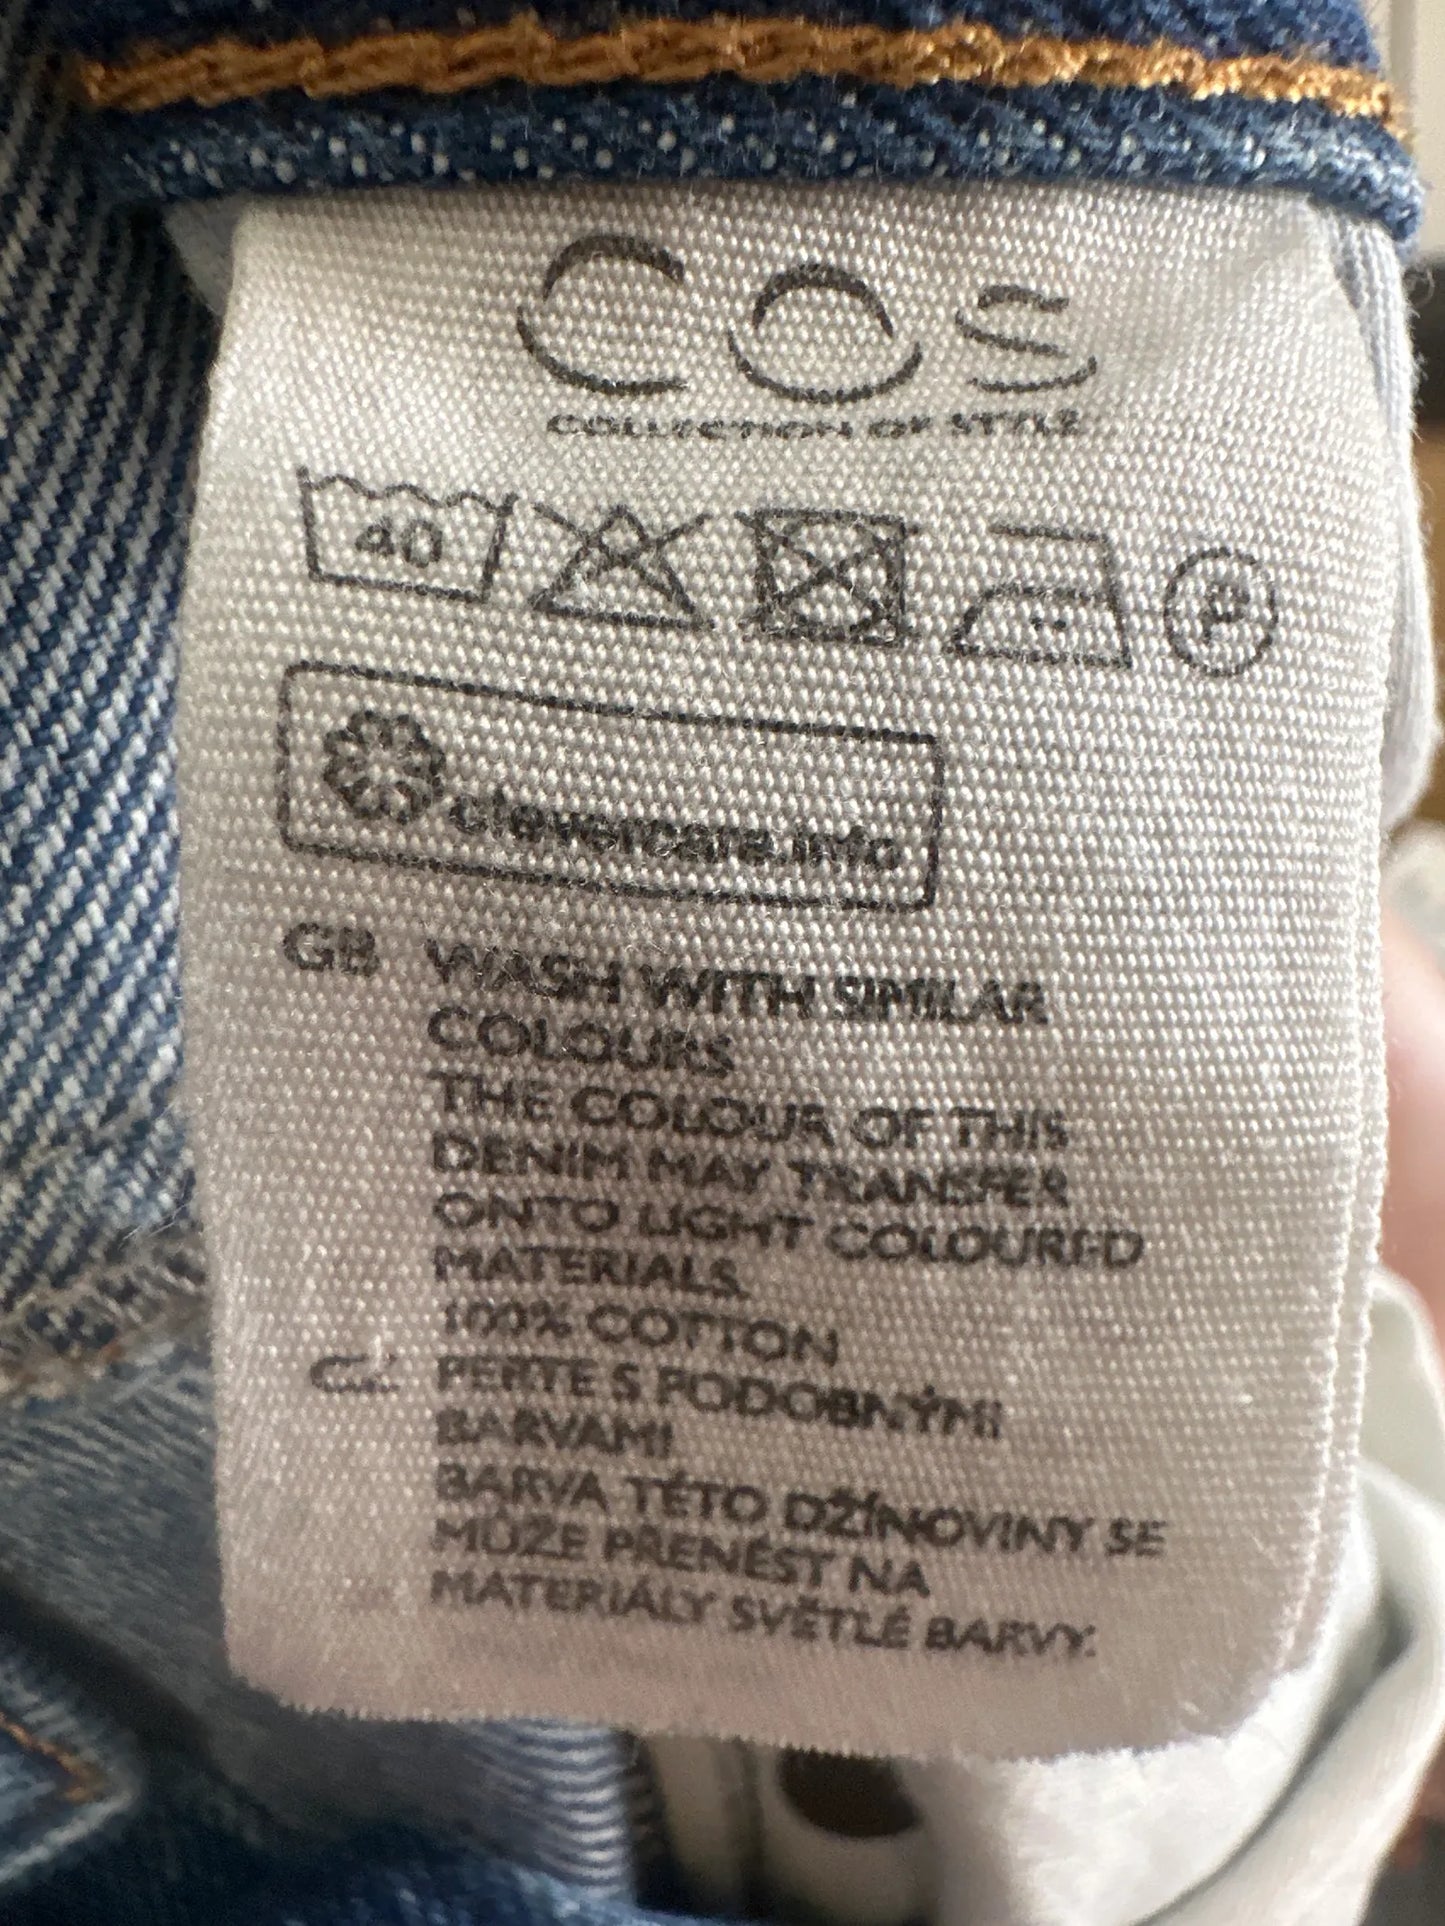 Cos-jeans